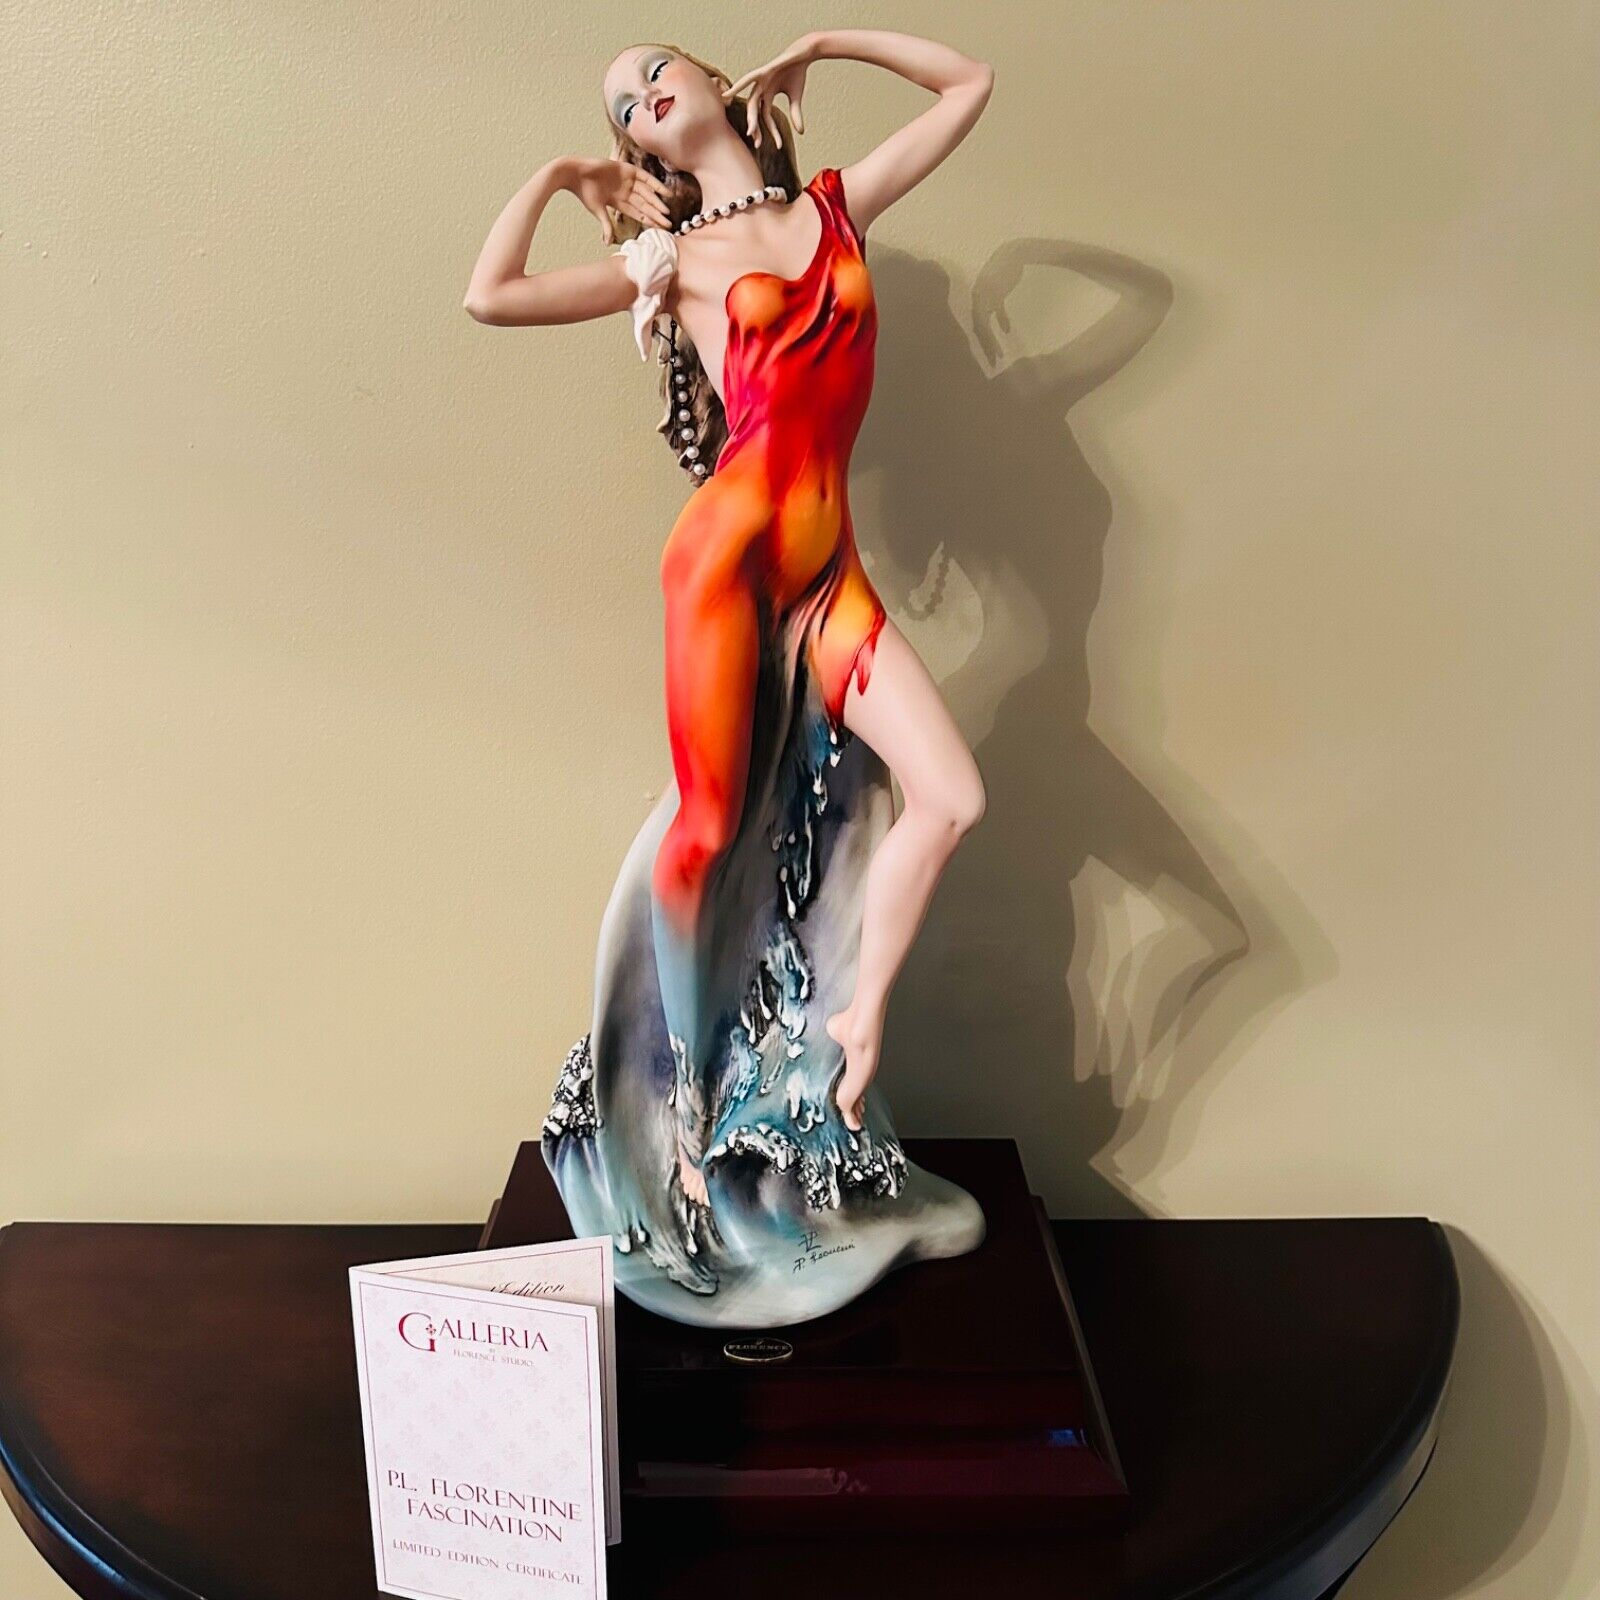 Giuseppe Armani Venus By Paolo Leoncini ARTIST PROOF Limited Edition Sculpture